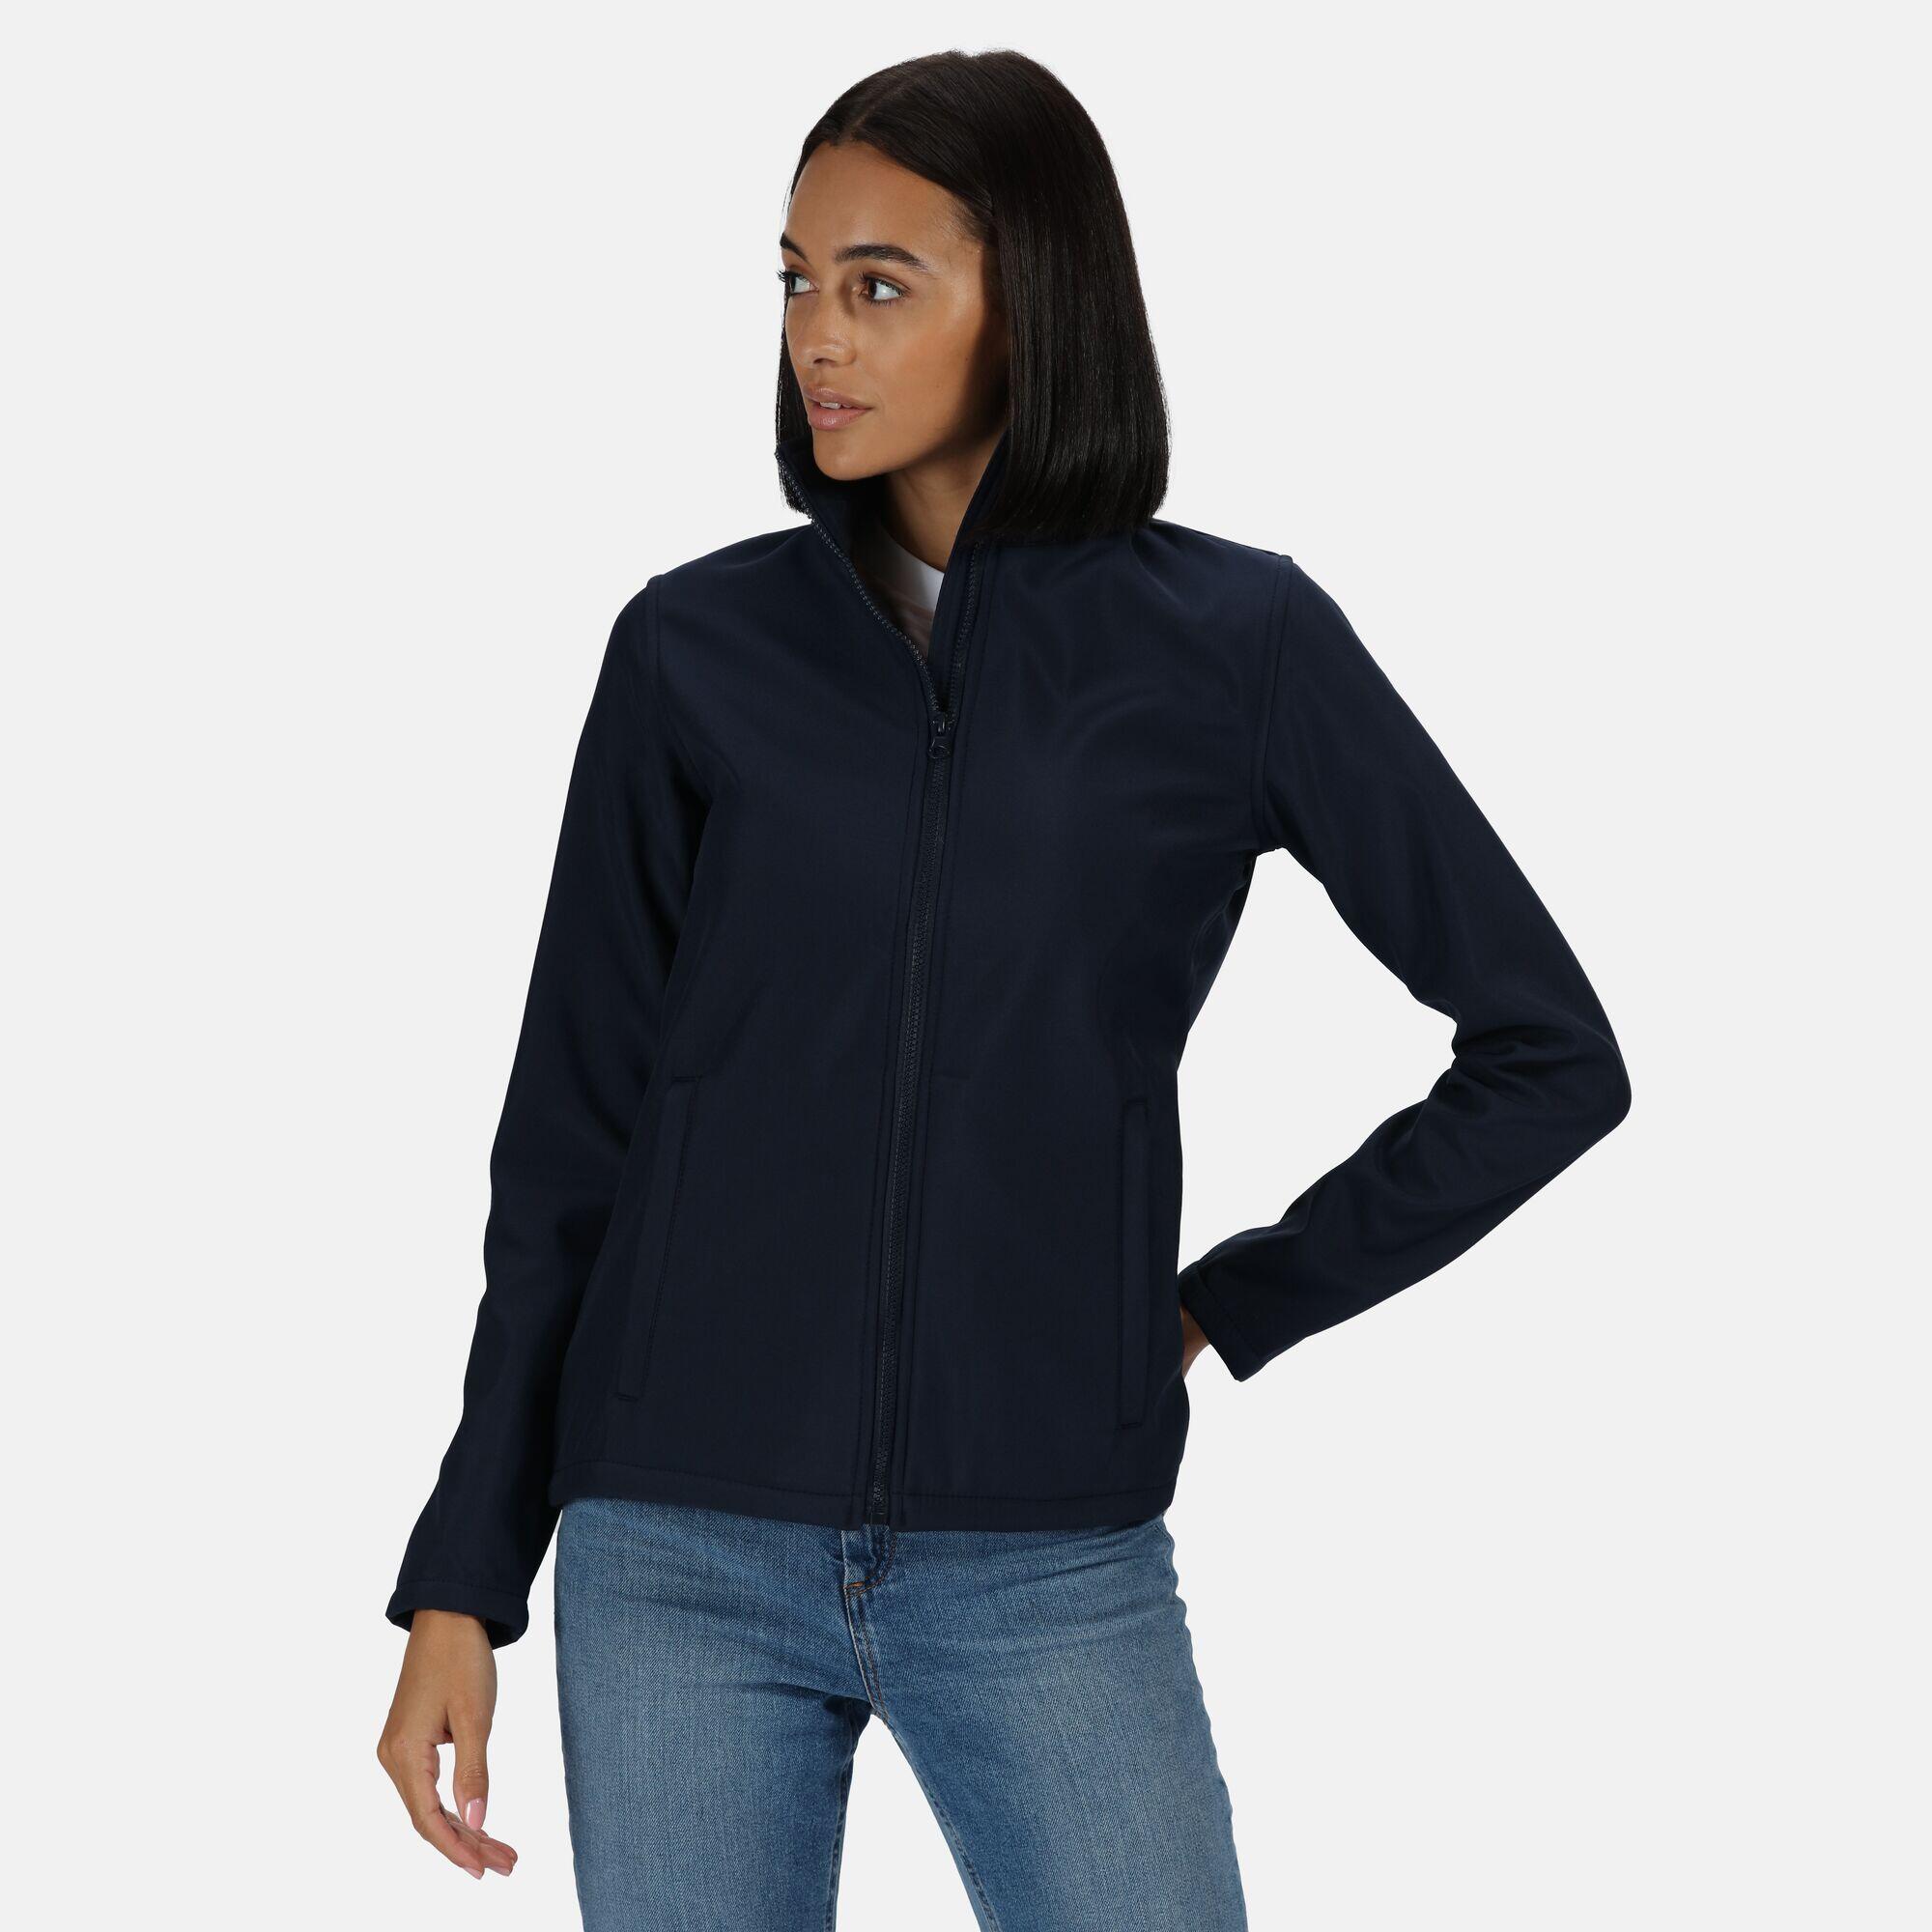 Standout Womens/Ladies Ablaze Printable Soft Shell Jacket (Navy/Navy) 4/5